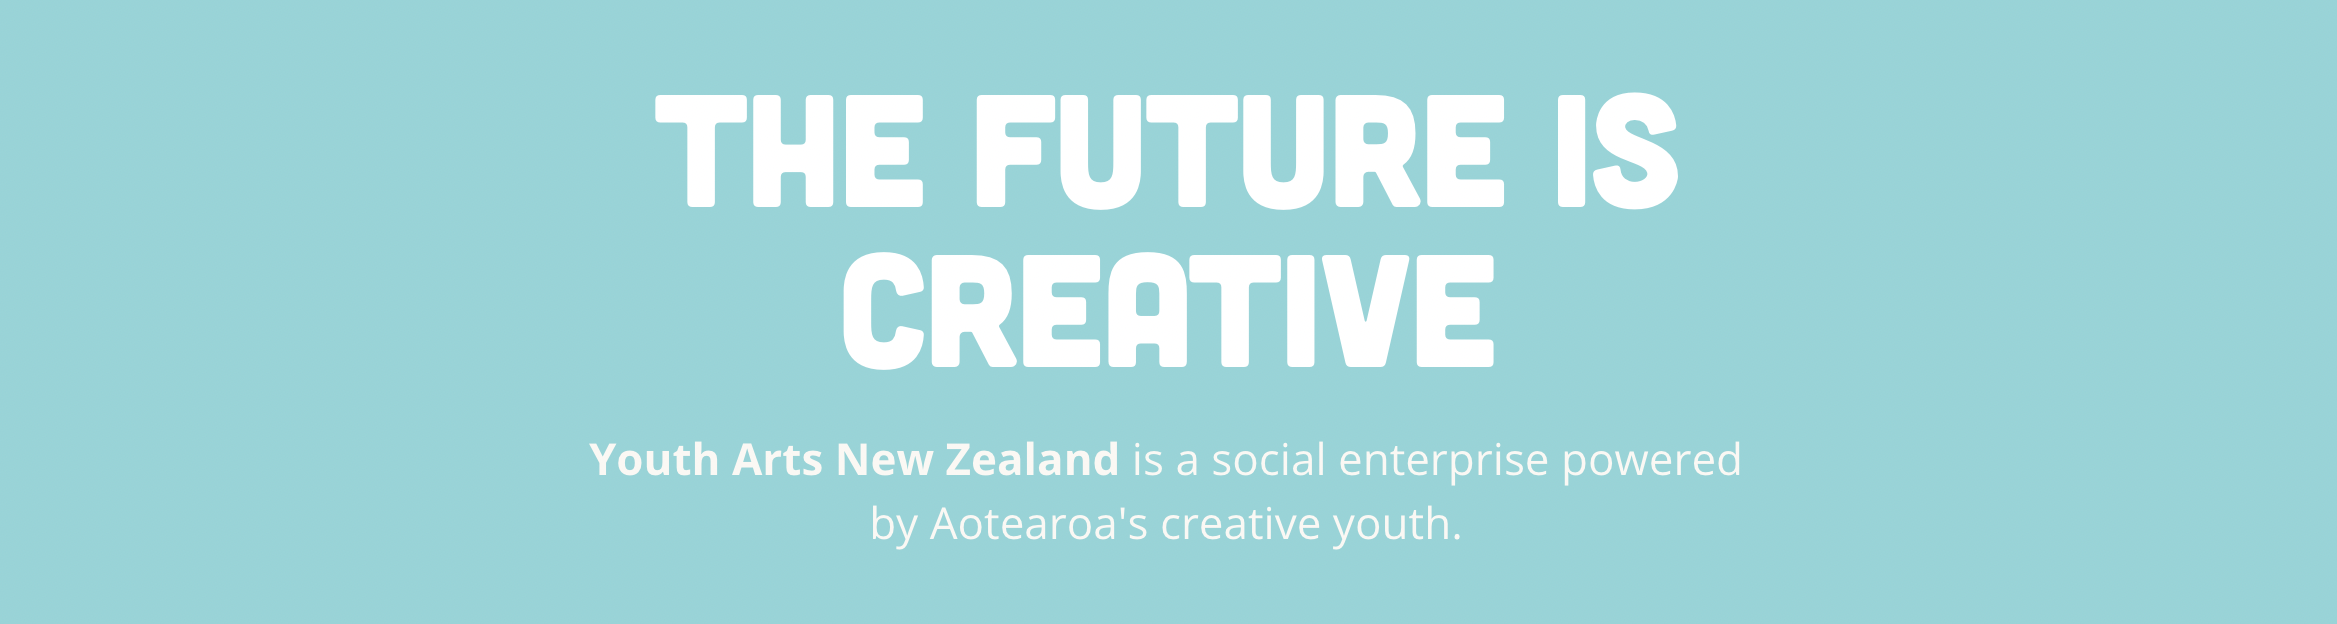 The Future is Creative – Youth Arts New Zealand is a social enterprise powered by Aotearoa's creative youth